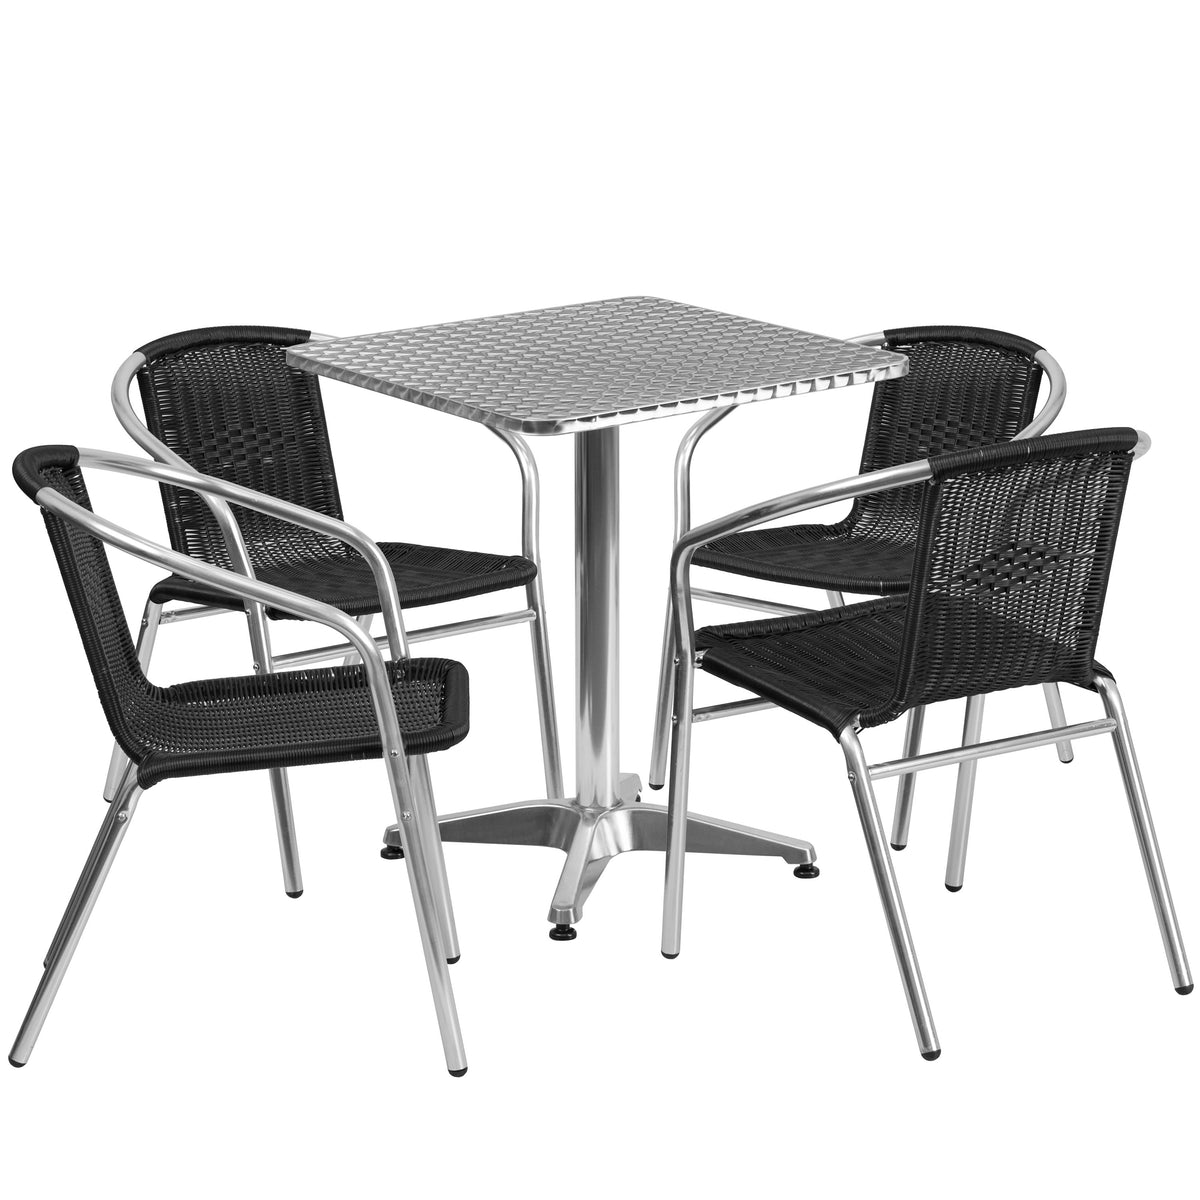 Black |#| 23.5inch Square Aluminum Indoor-Outdoor Table Set with 4 Black Rattan Chairs